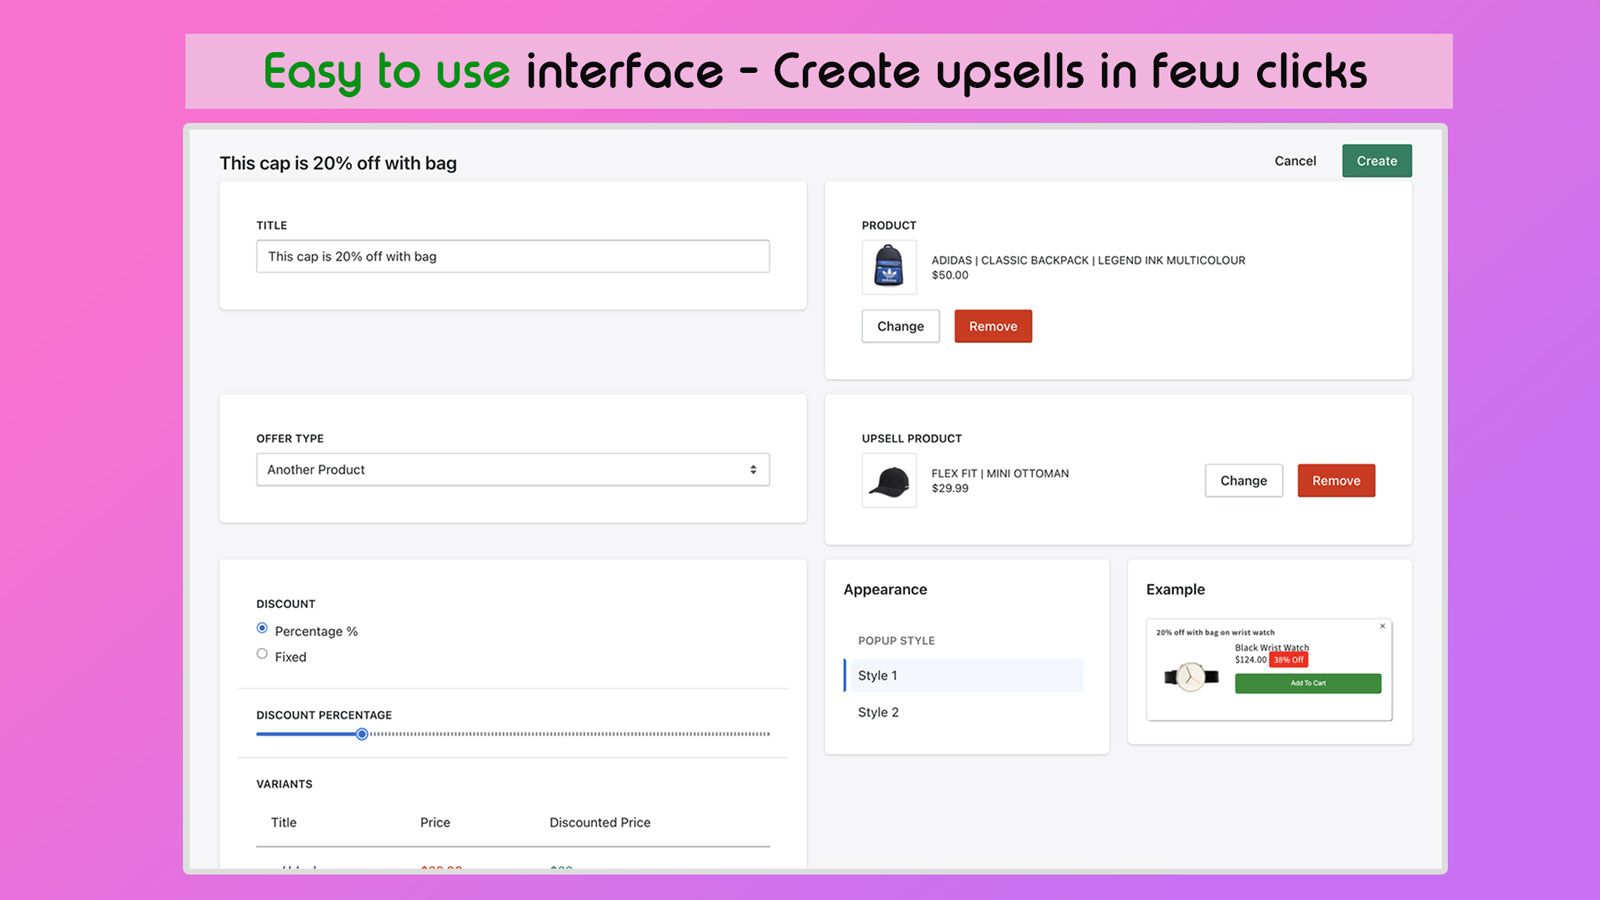 Easy to use interface - Create upsells quickly.